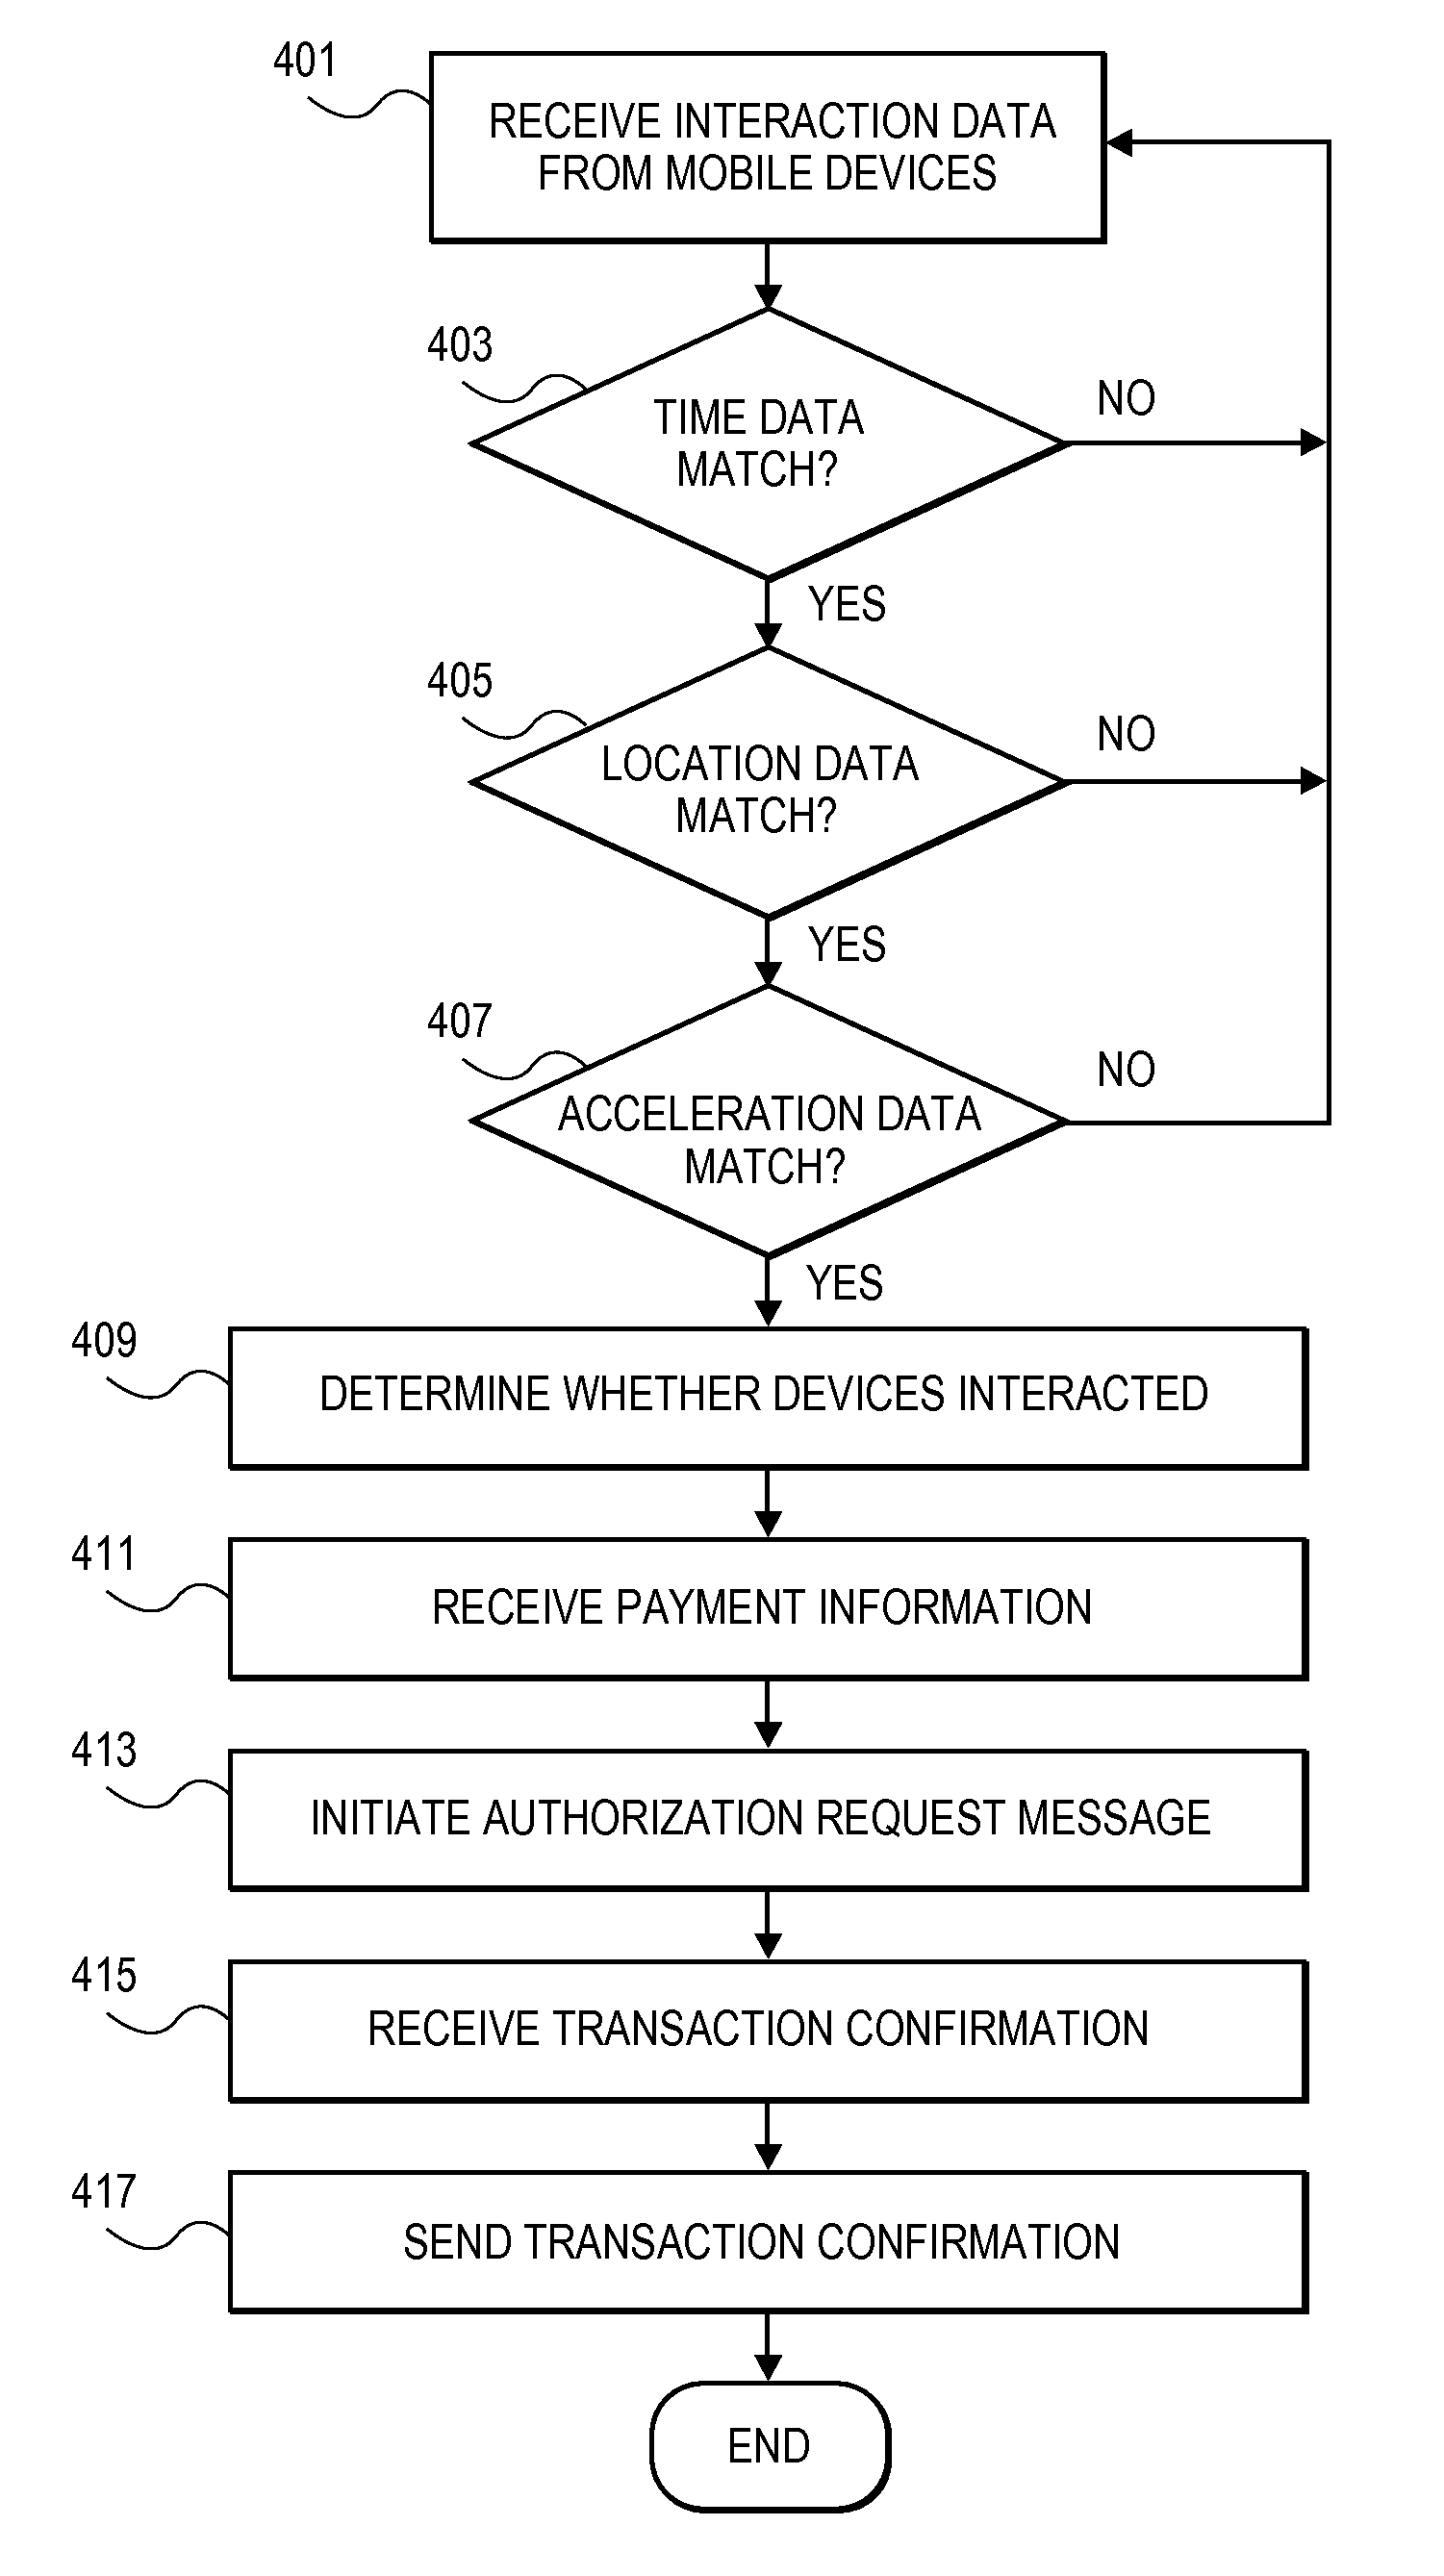 Transaction using a mobile device with an accelerometer